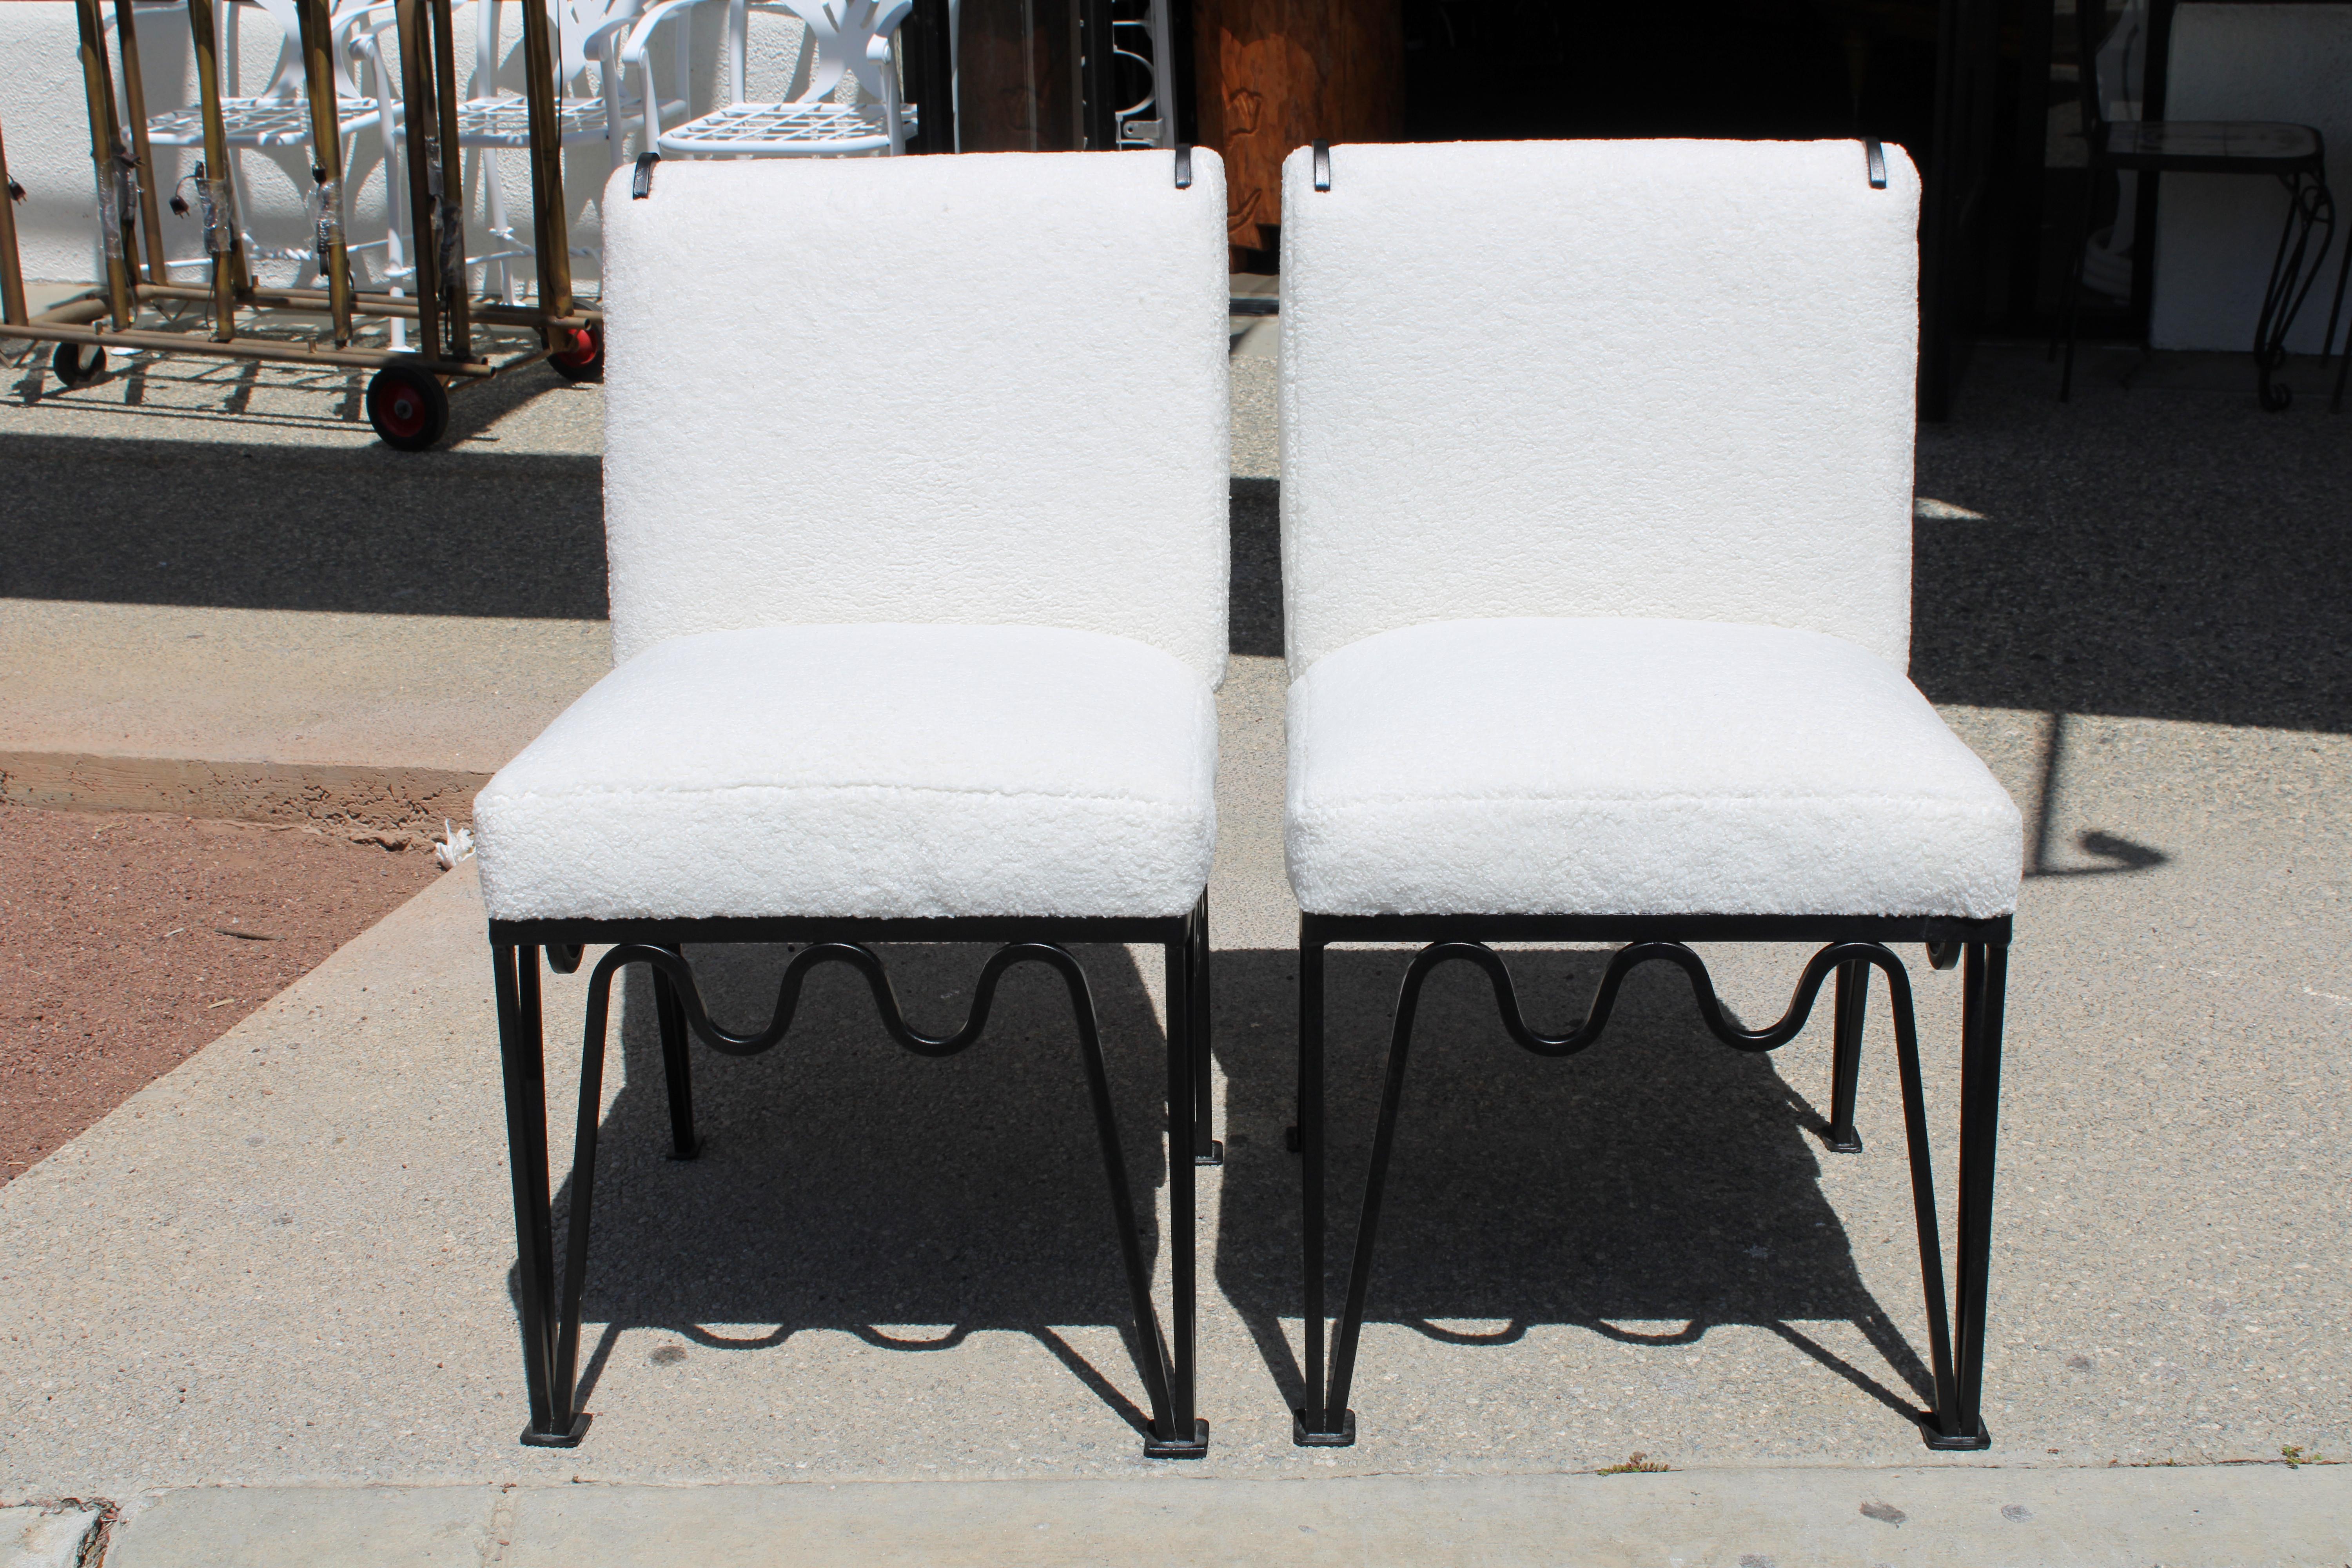 Pair of steel chairs attributed to Walter Lamb for the Los Angeles based Pacific Iron Products Company.  Frames have been professionally sand blasted and powder coated.  Chairs have been upholstered in a Knoll textile designed by Nick Cave called